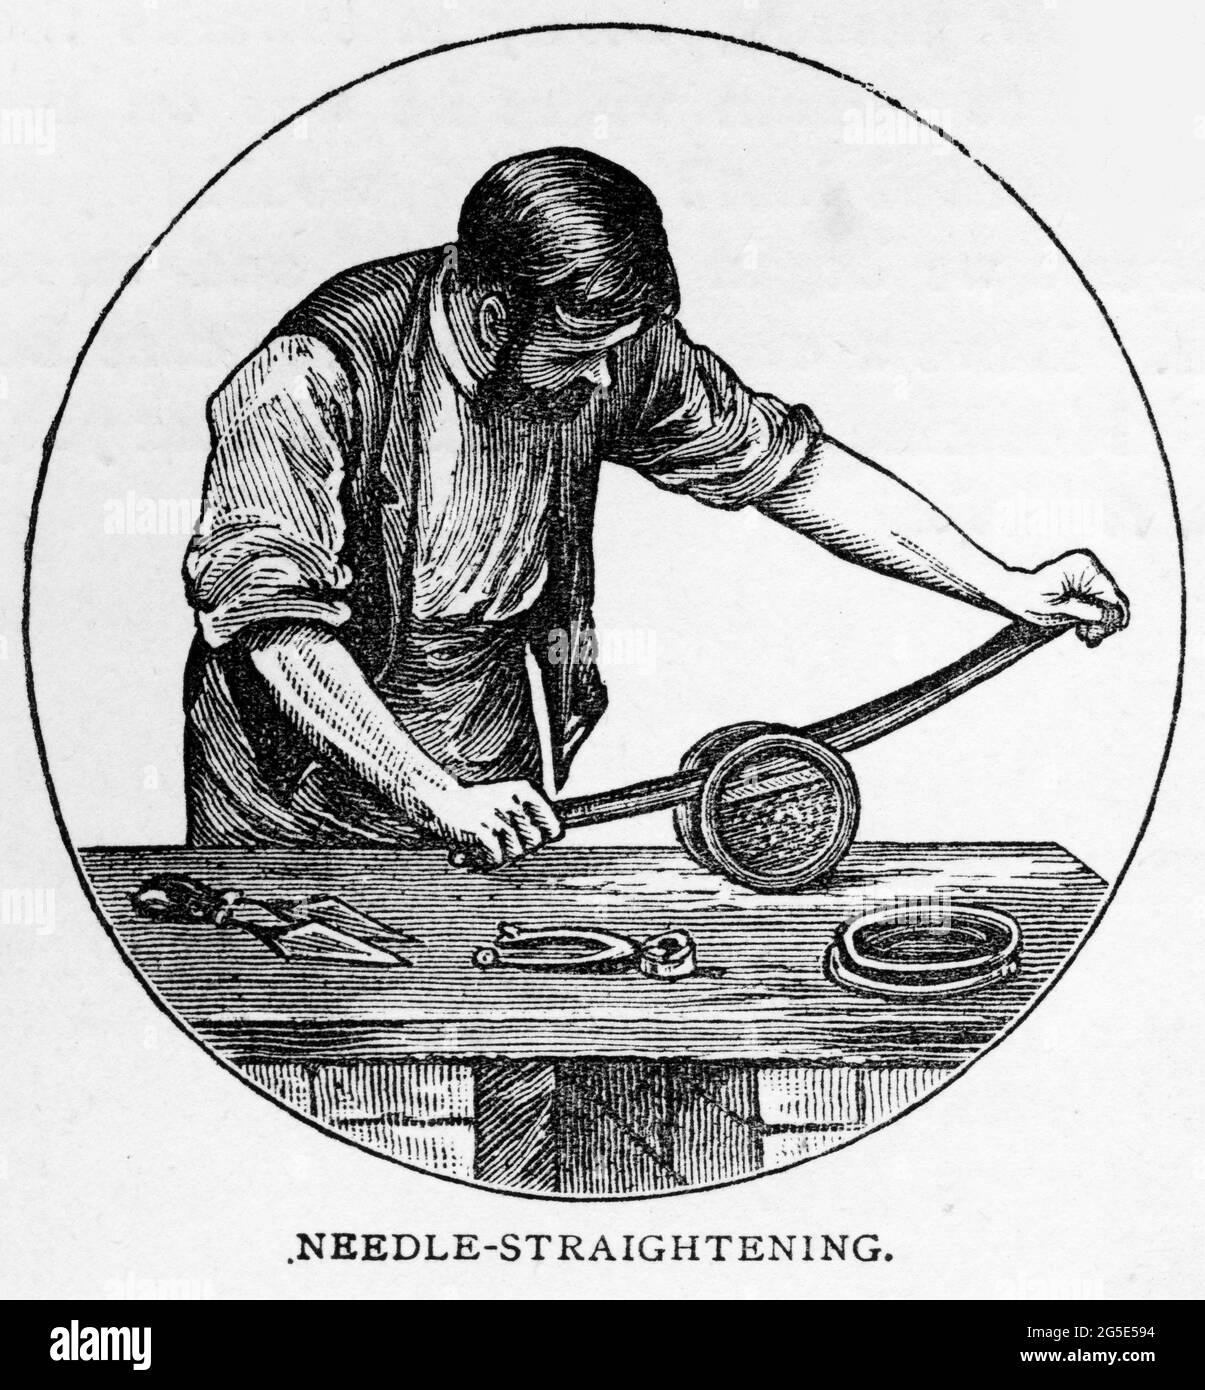 Engraving of a tradesman straightening needles in a press Stock Photo